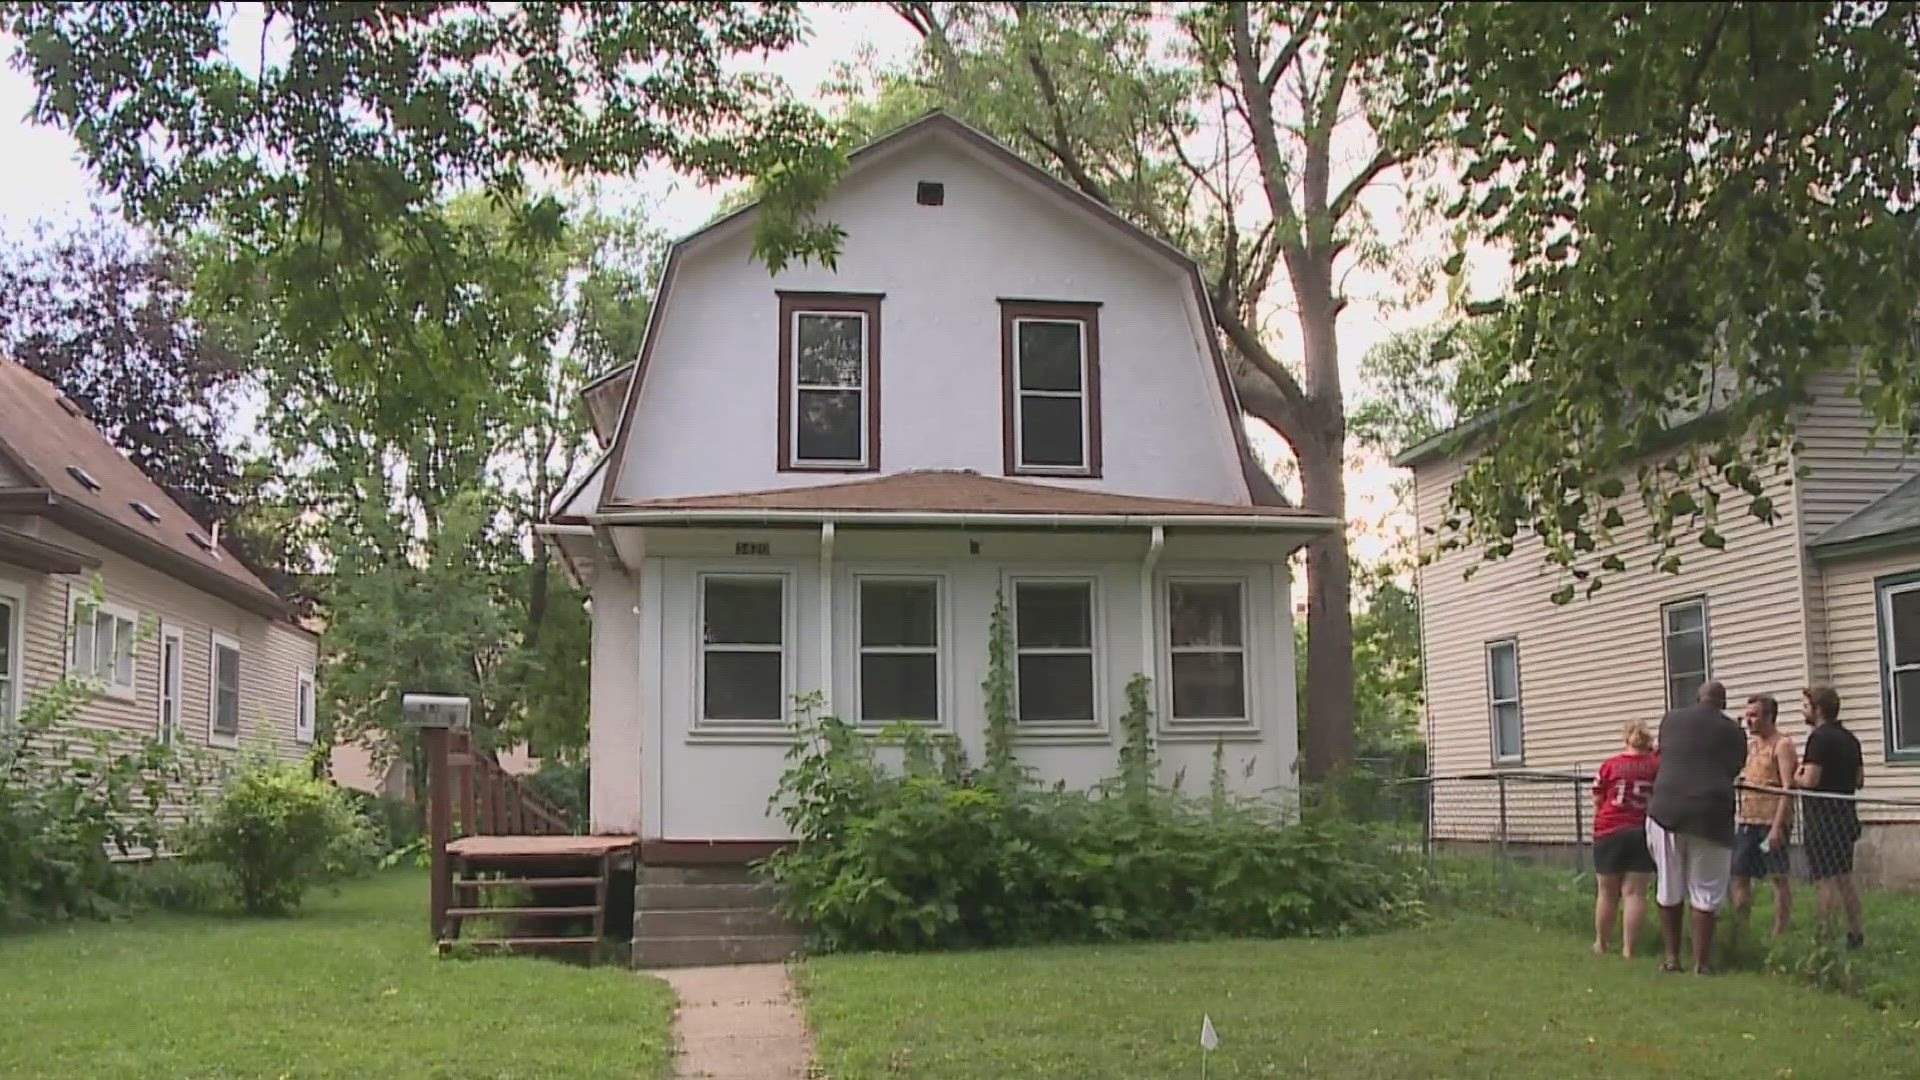 The Minneapolis house featured in "Purple Rain" will be available to rent as an Airbnb for a year.